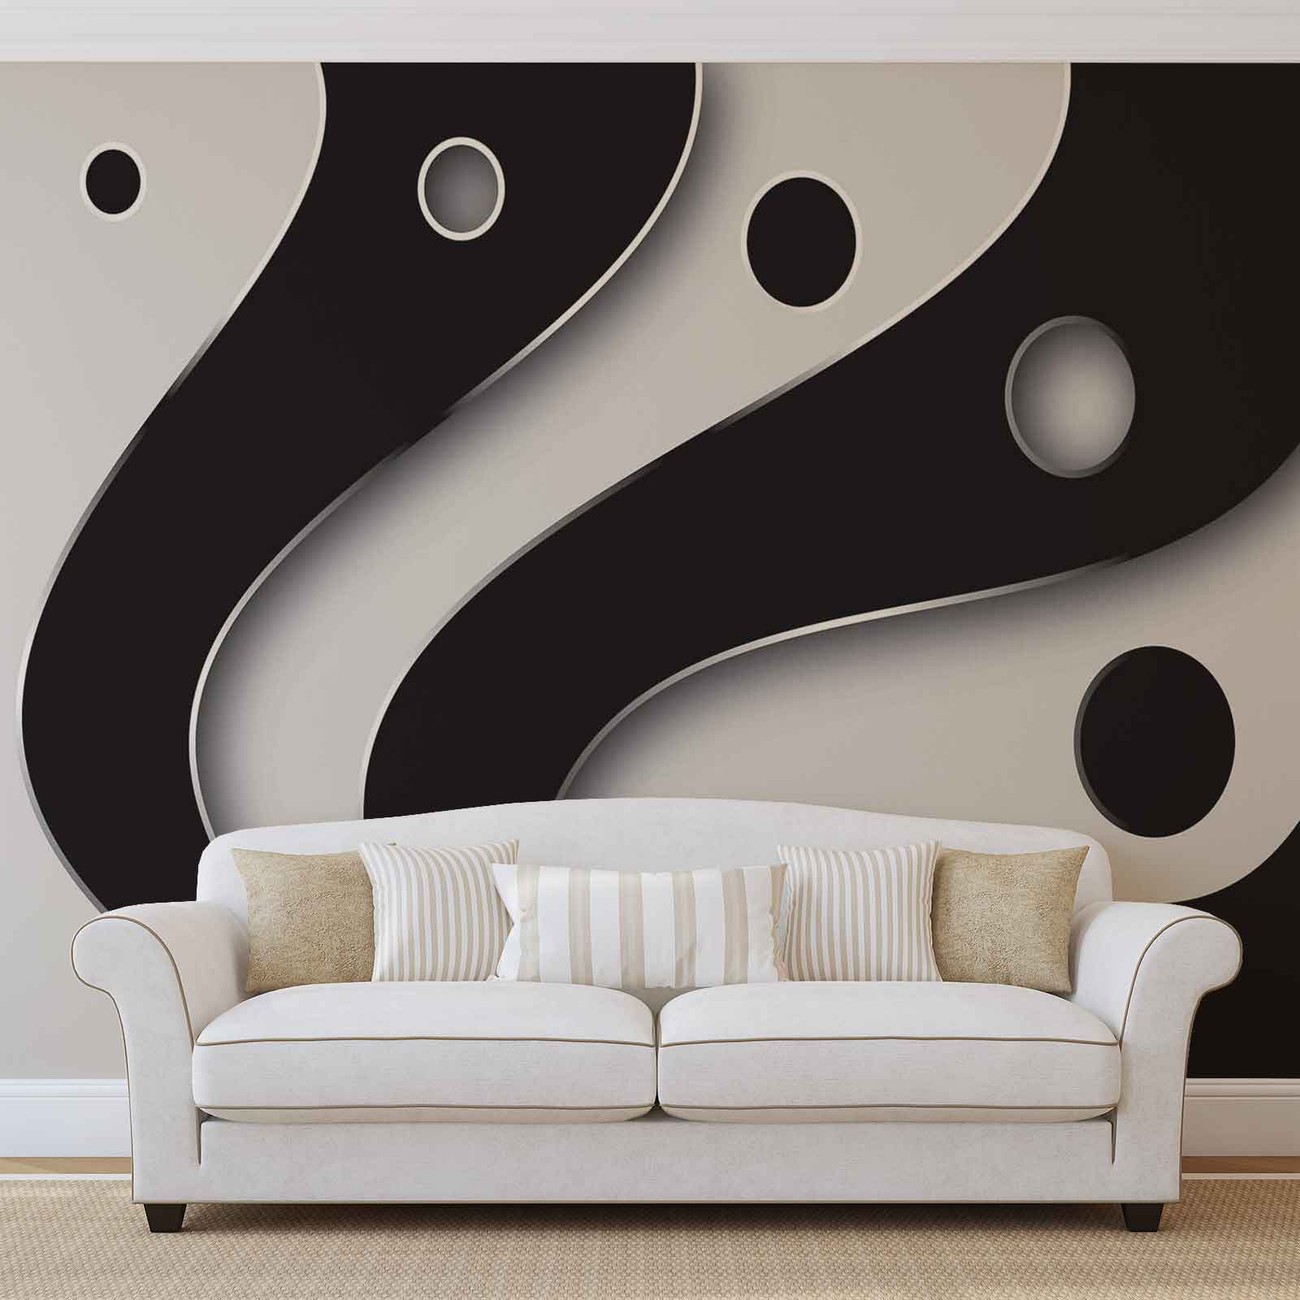 House & Home - 50+ Dramatic Wallpapers & Murals To Inspire Your Fall  Decorating